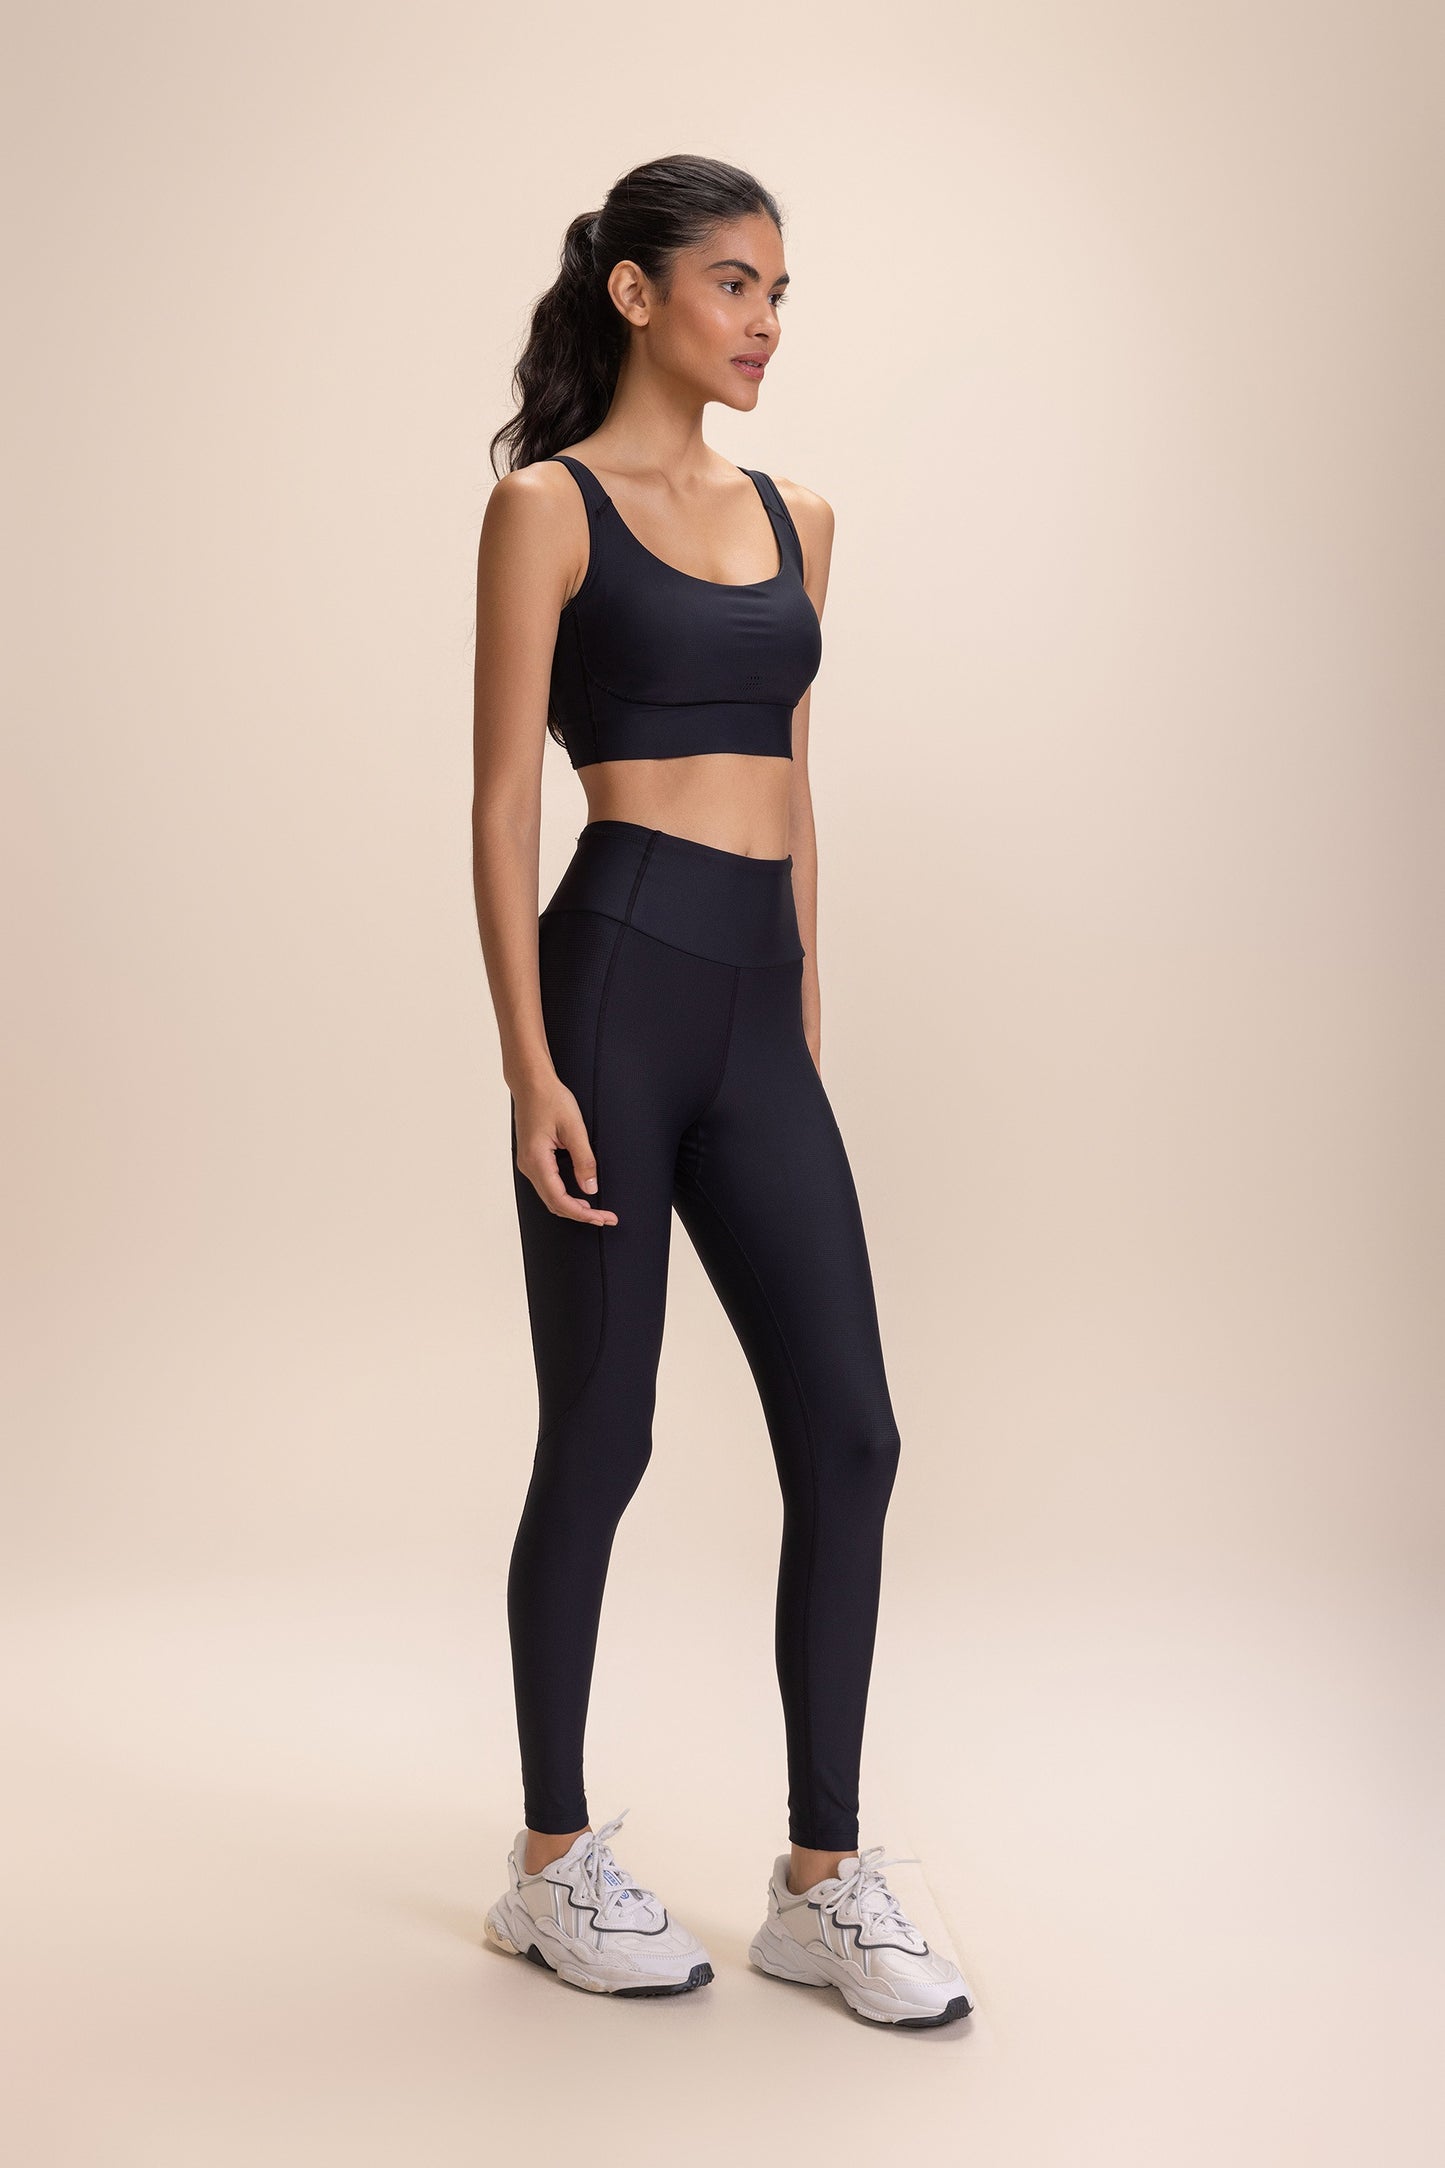 A woman wearing "Legging 6 Pockets Speed" in black, featuring high-waisted design, six pockets, paired with a matching black sports bra and white athletic shoes.